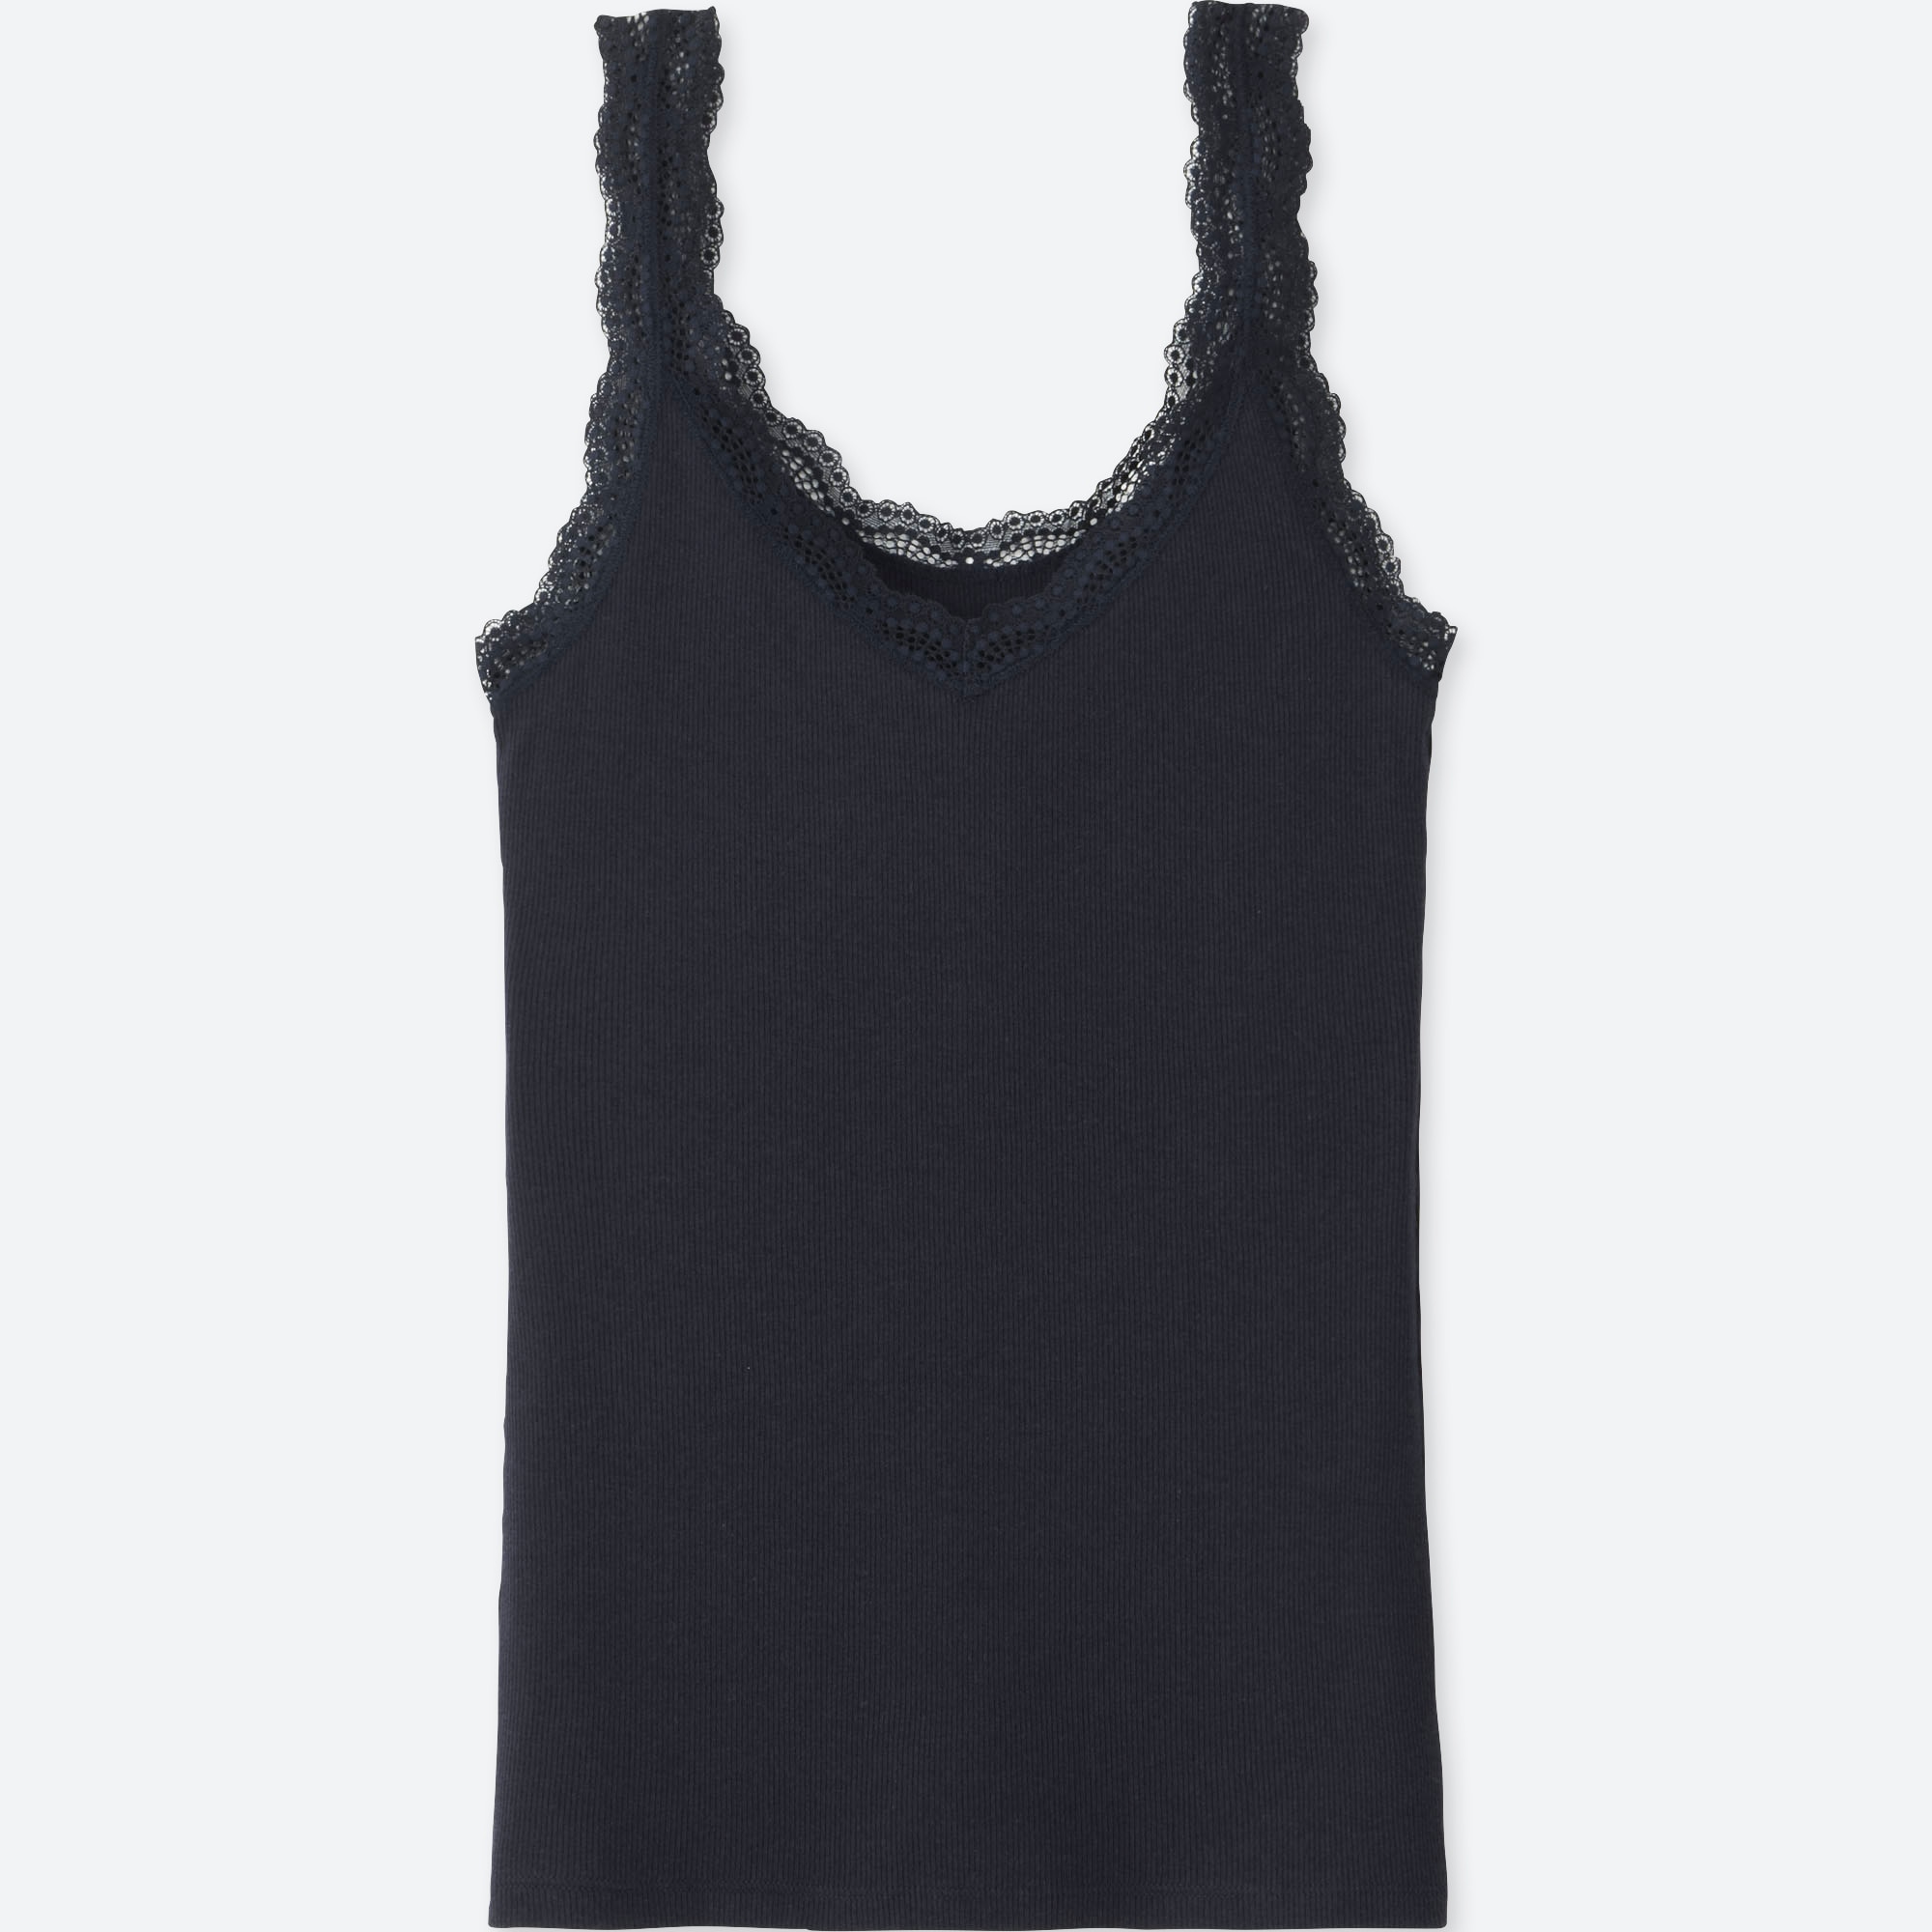 WOMEN 2 WAY RIBBED LACE TANK TOP | UNIQLO US